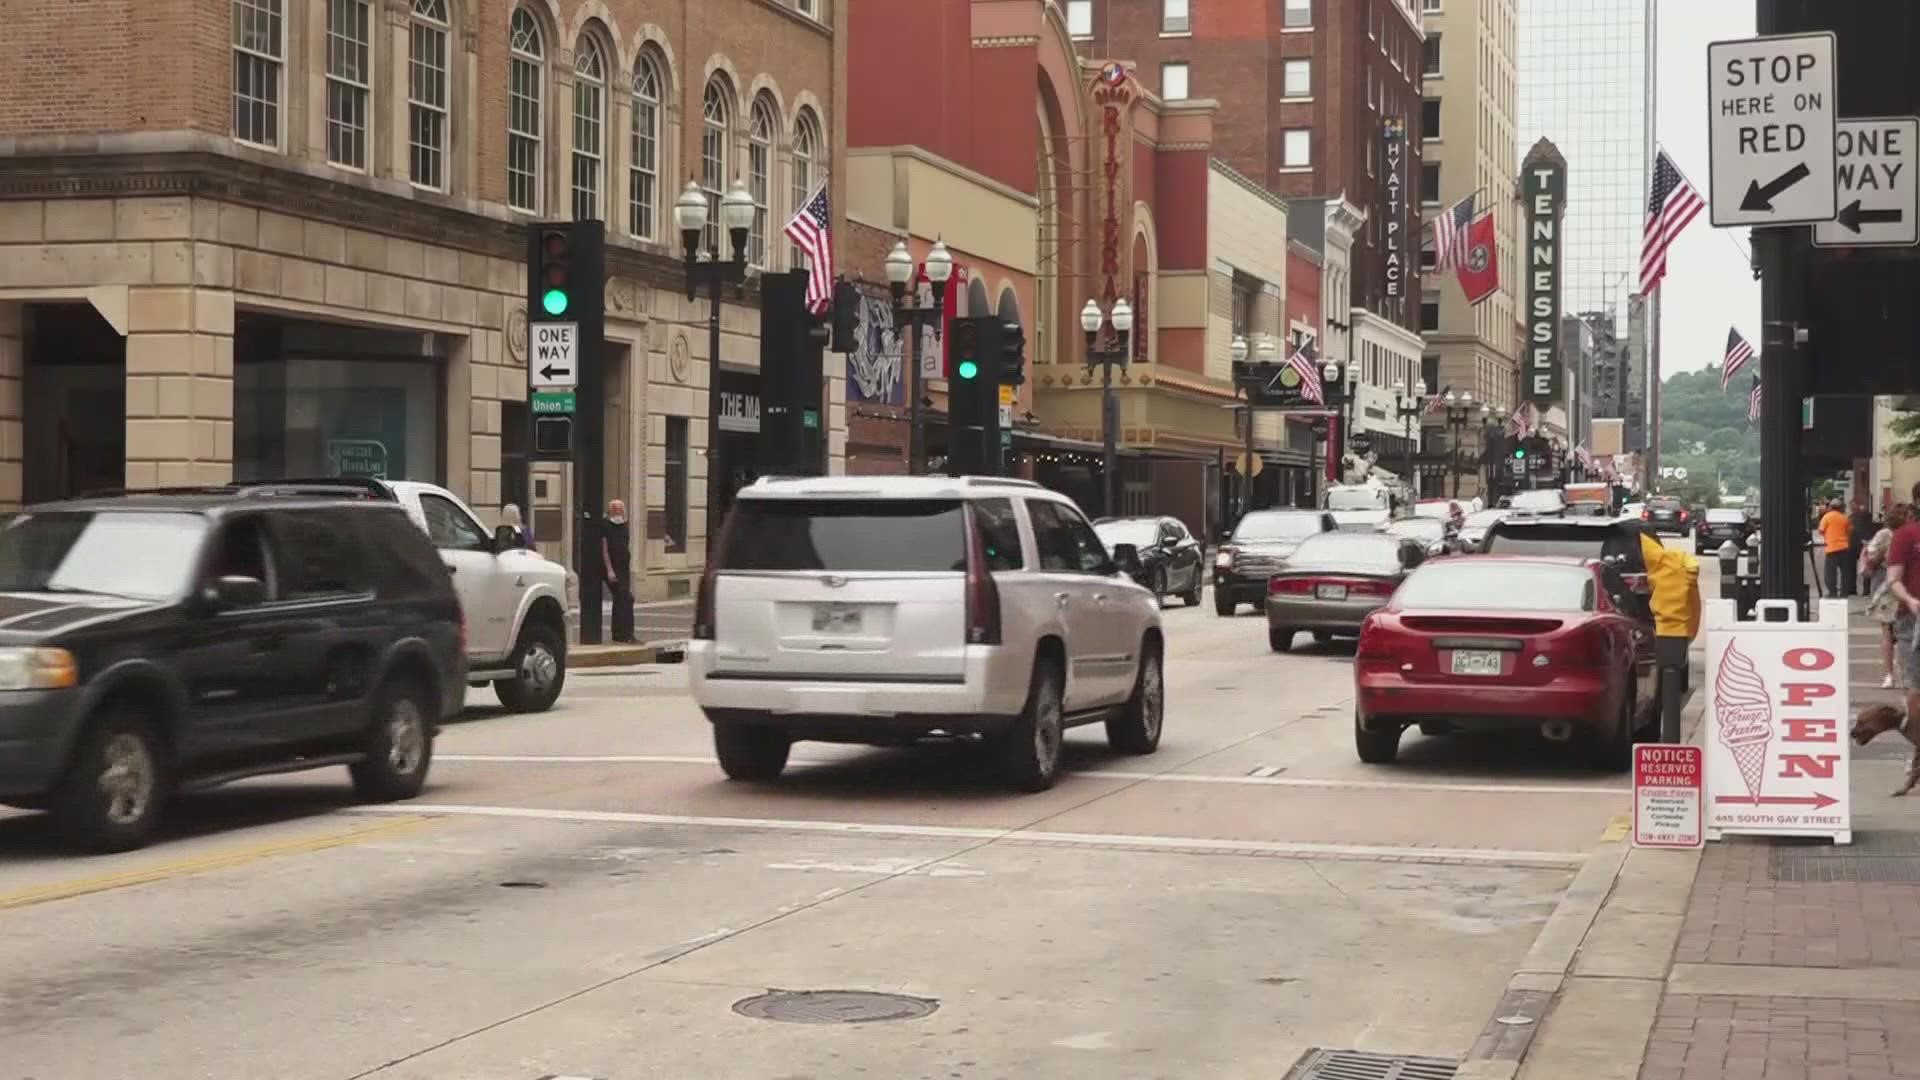 The Downtown Alliance said Knoxville is bustling with business, but said many employers are facing issues with staffing.